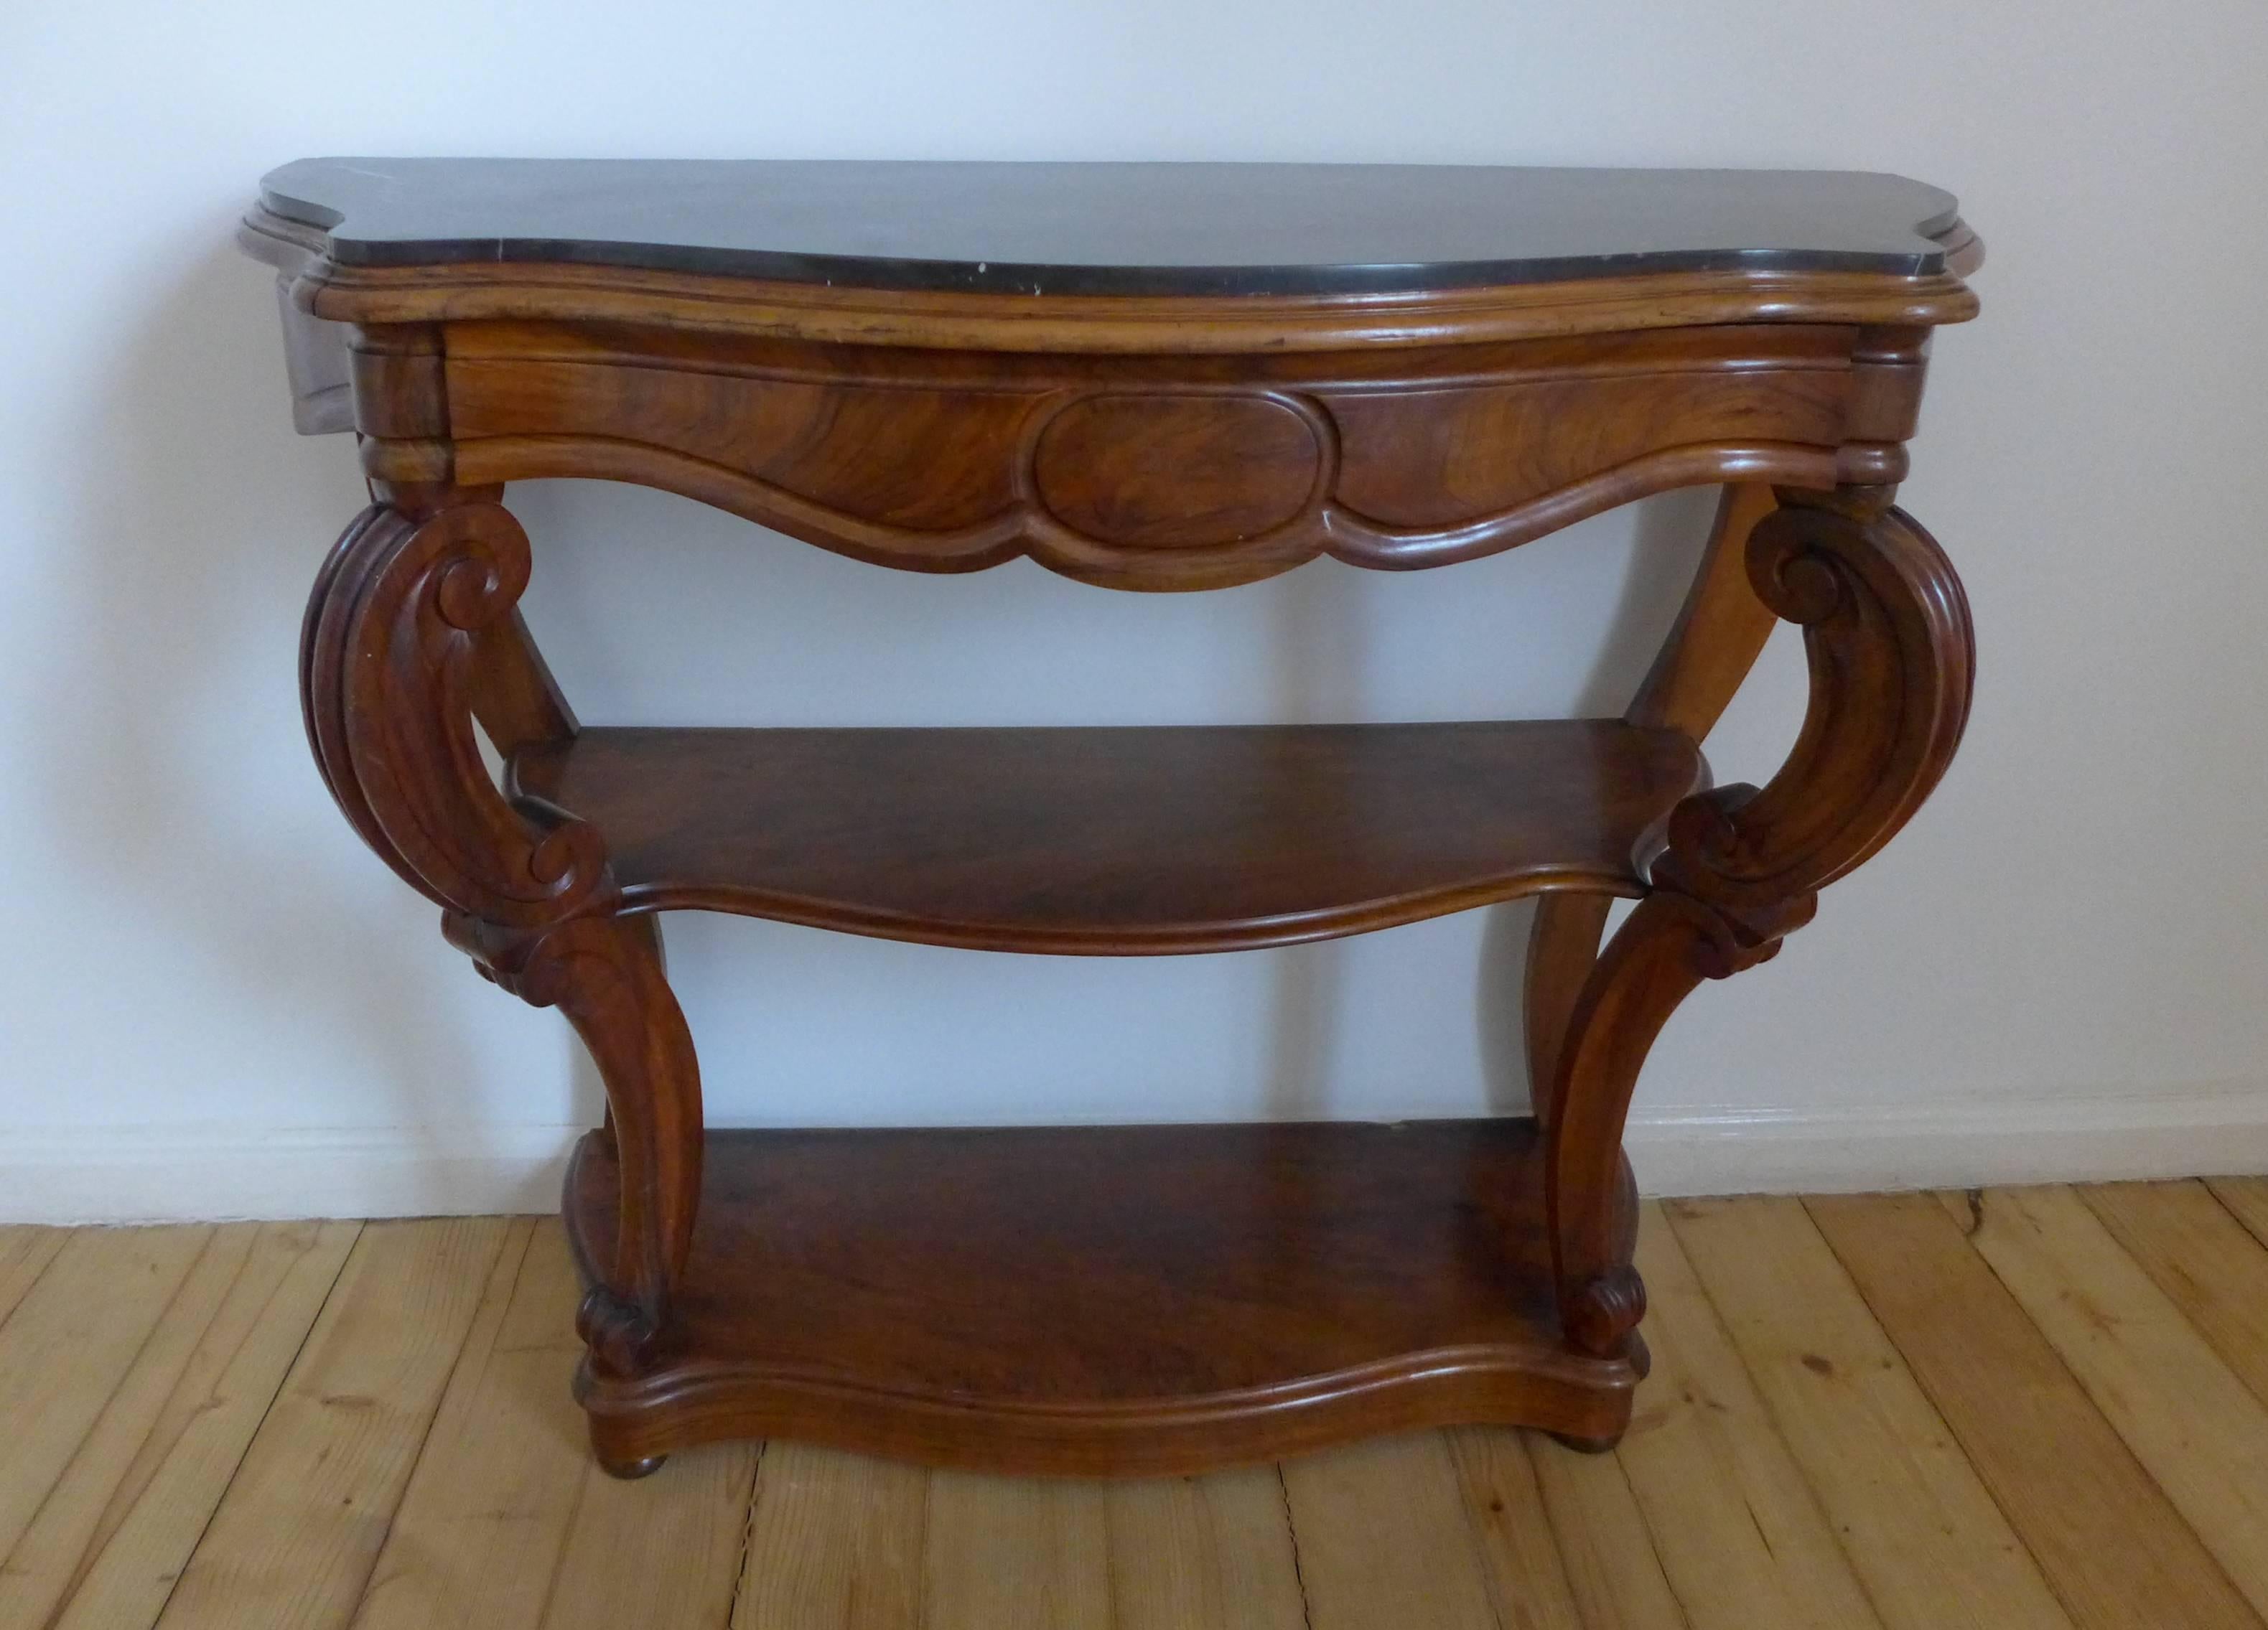 A beautiful 19th century antique French walnut console. This piece works double duty as a console with two tiers of shelving flanked by two supports that gracefully curve. There is a wide drawer and a dark green marble top in a very elegant shape. A